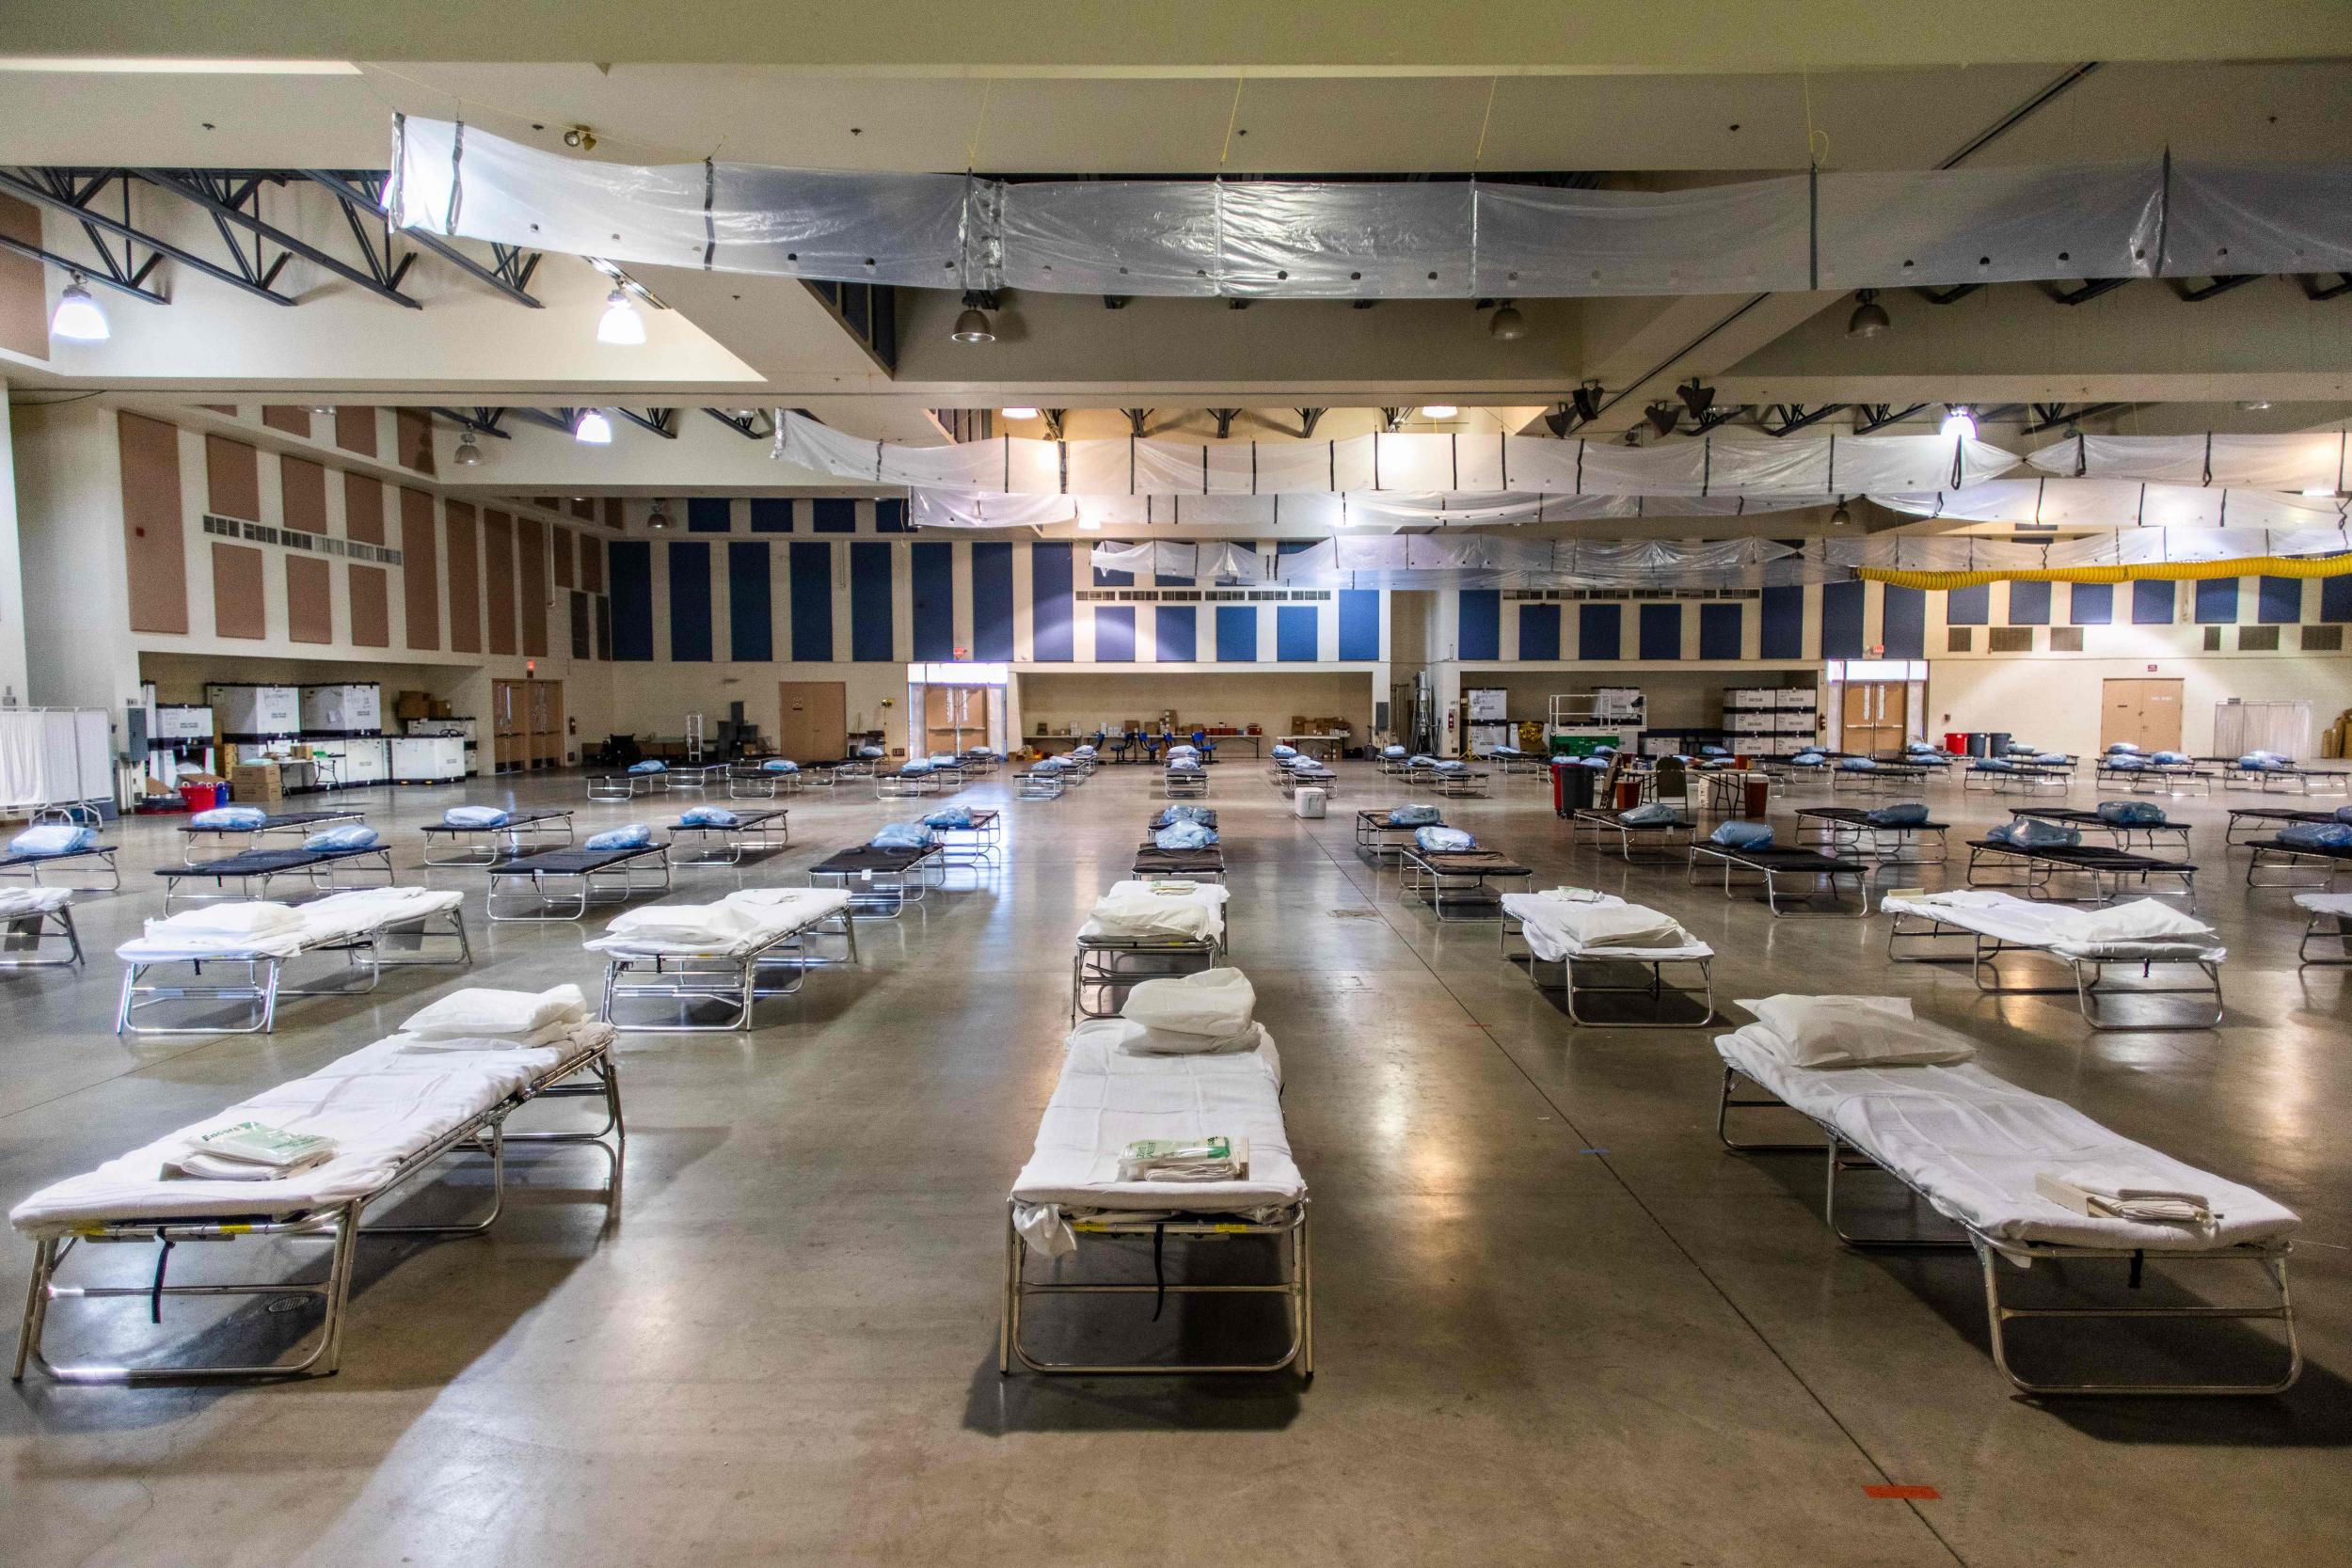 Temporary hospitals, like this one in California, have been set up all over the US and will not allow family visits